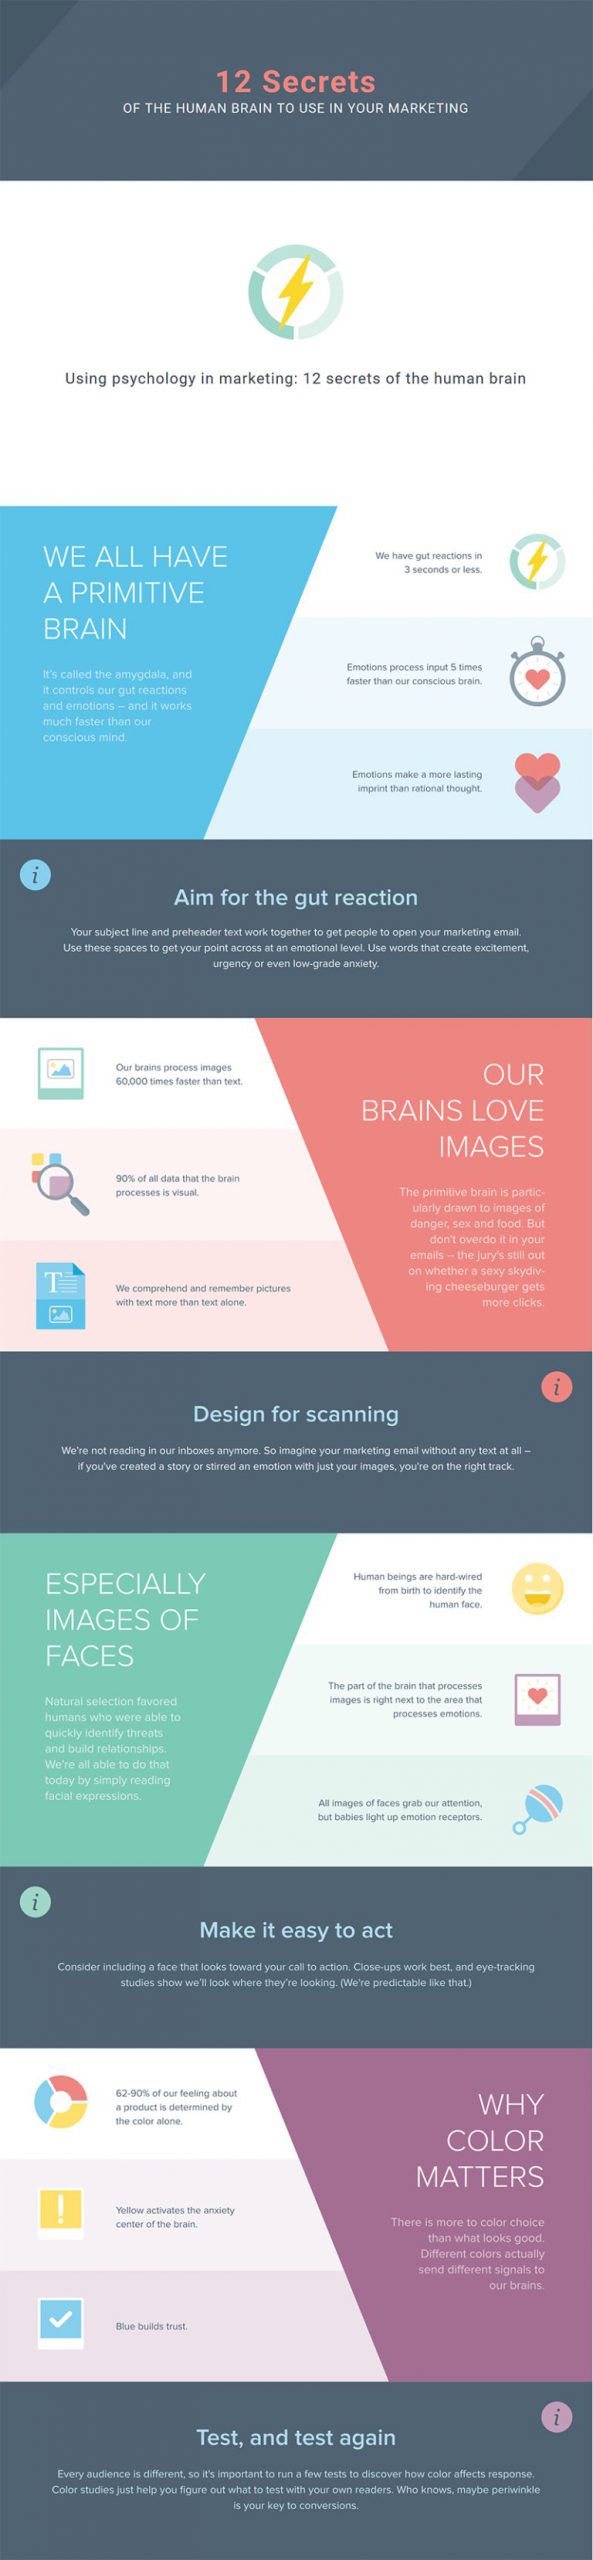 email marketing psychology 12 secrets for higher performing campaigns infographic scaled 1